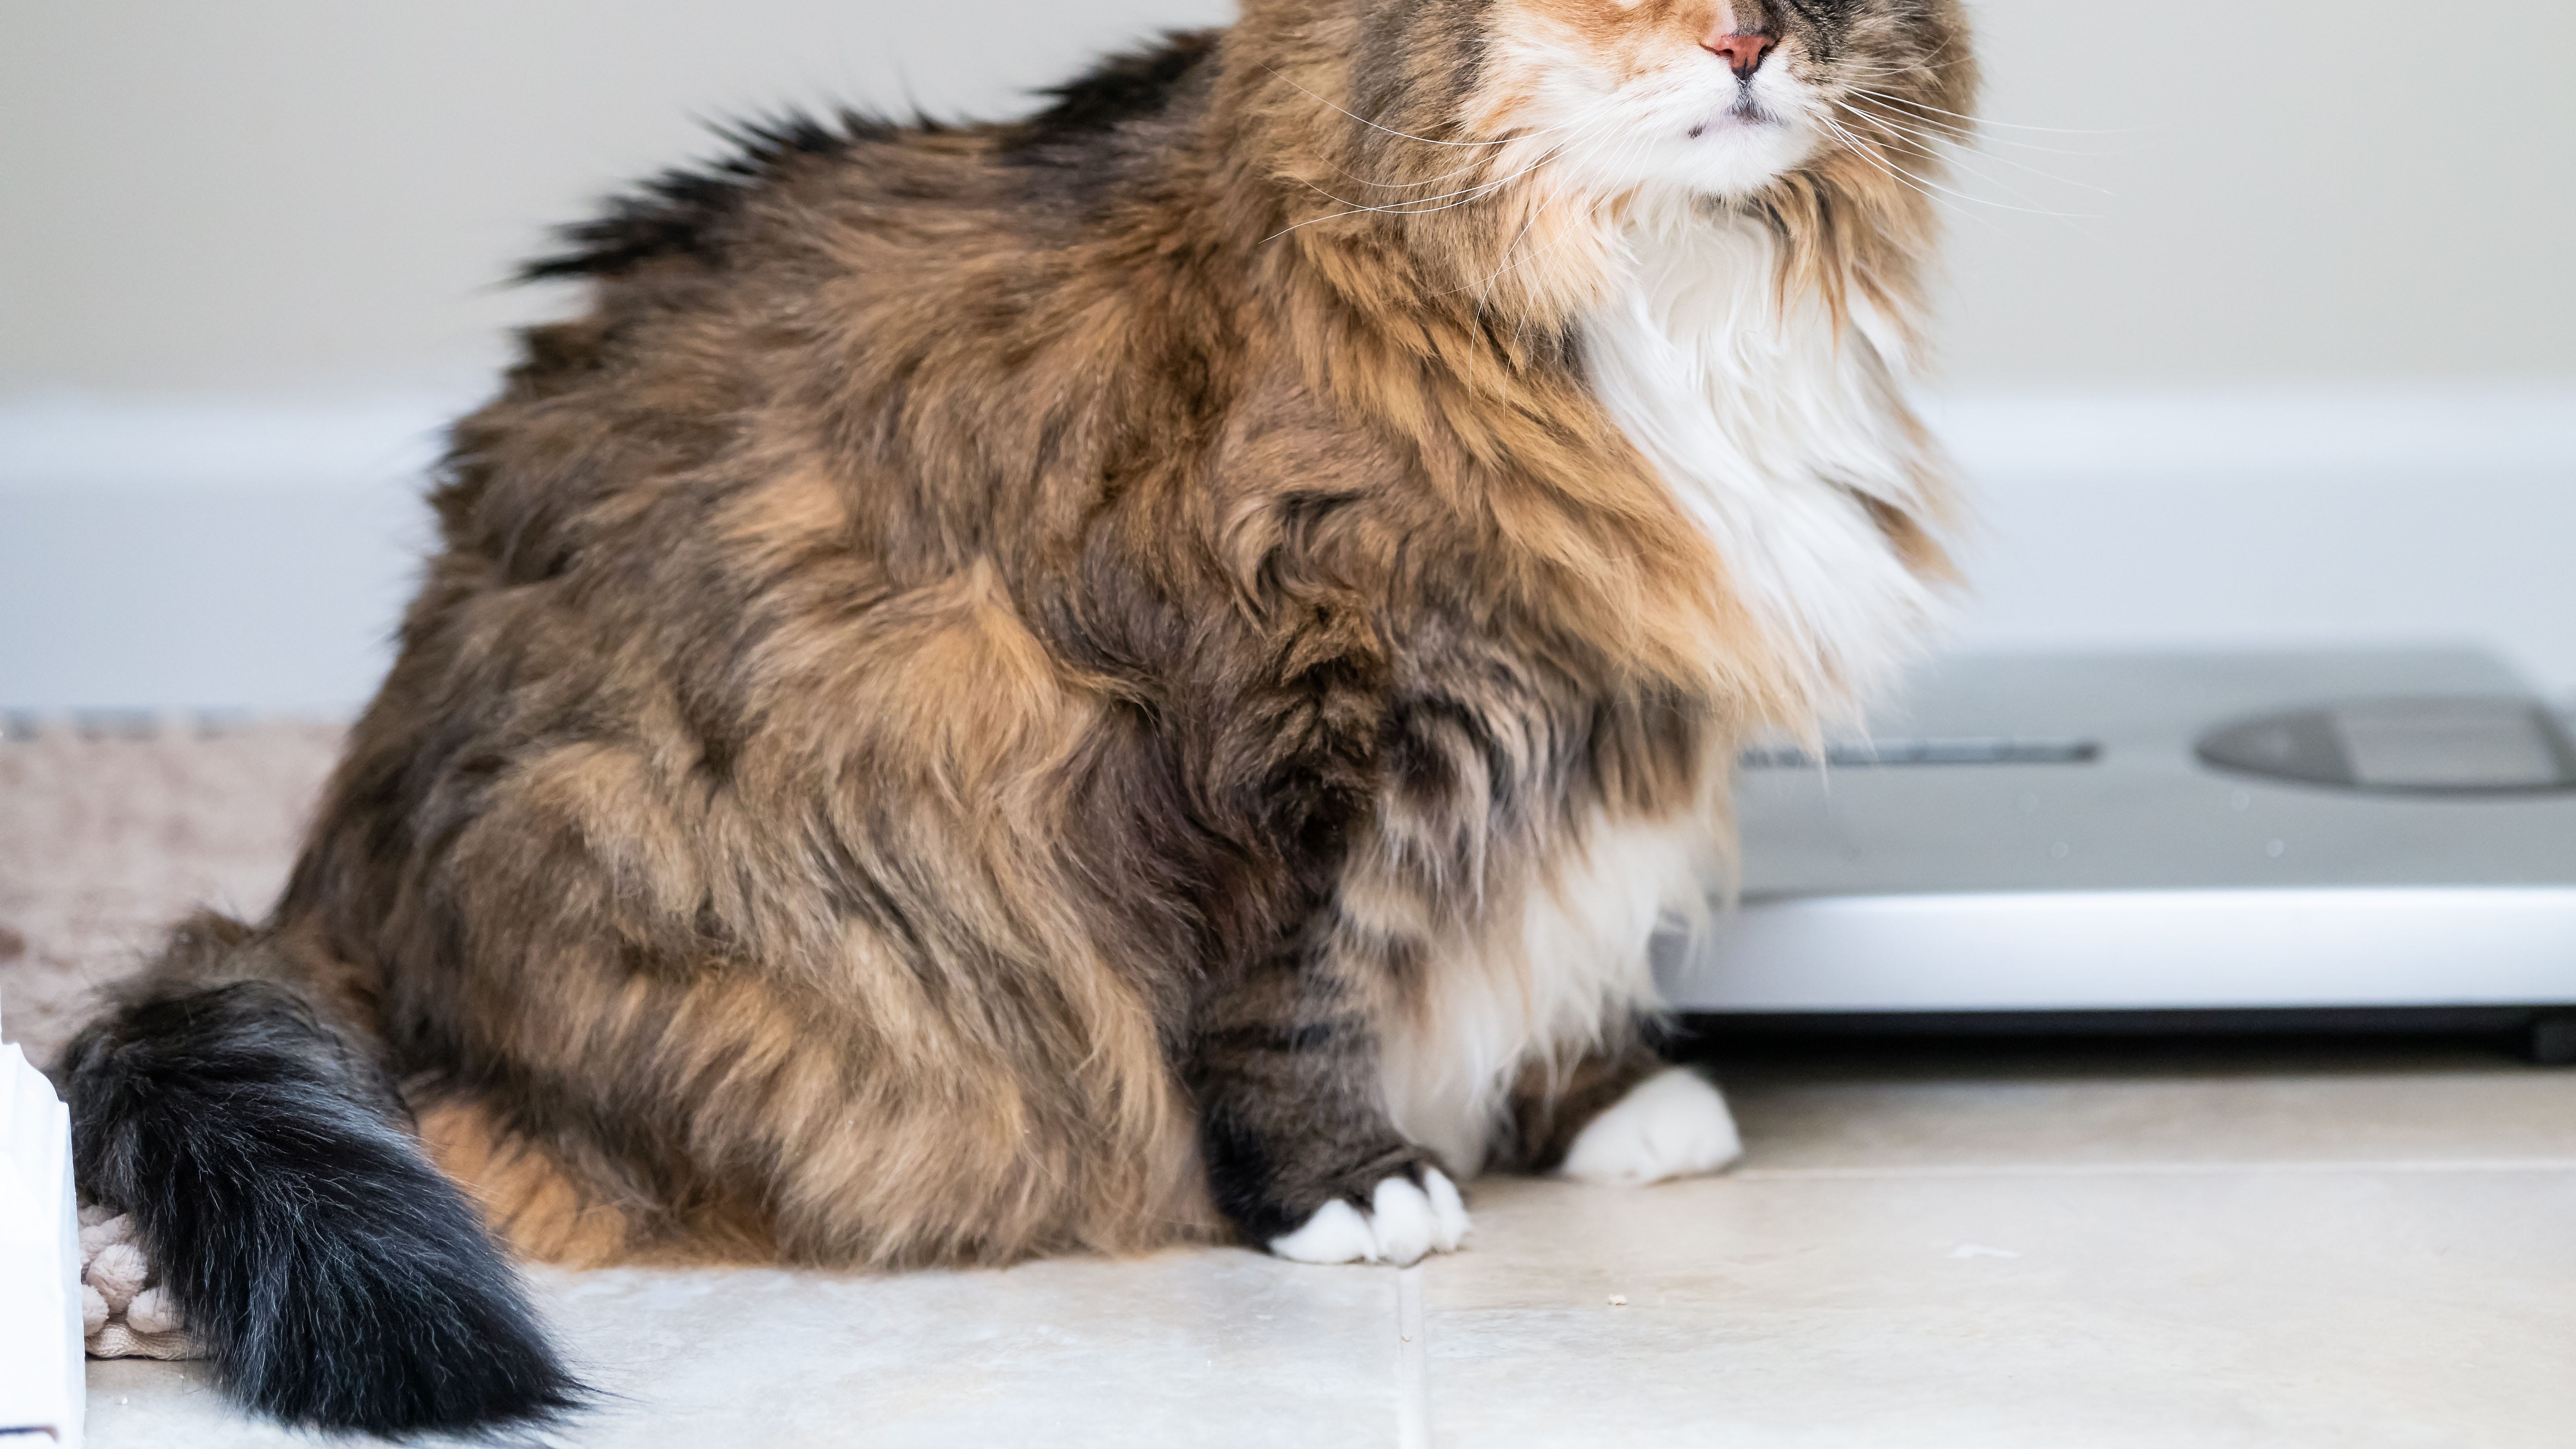 Animal rescue looking for home to help morbidly obese cat lose weight | Fox  News